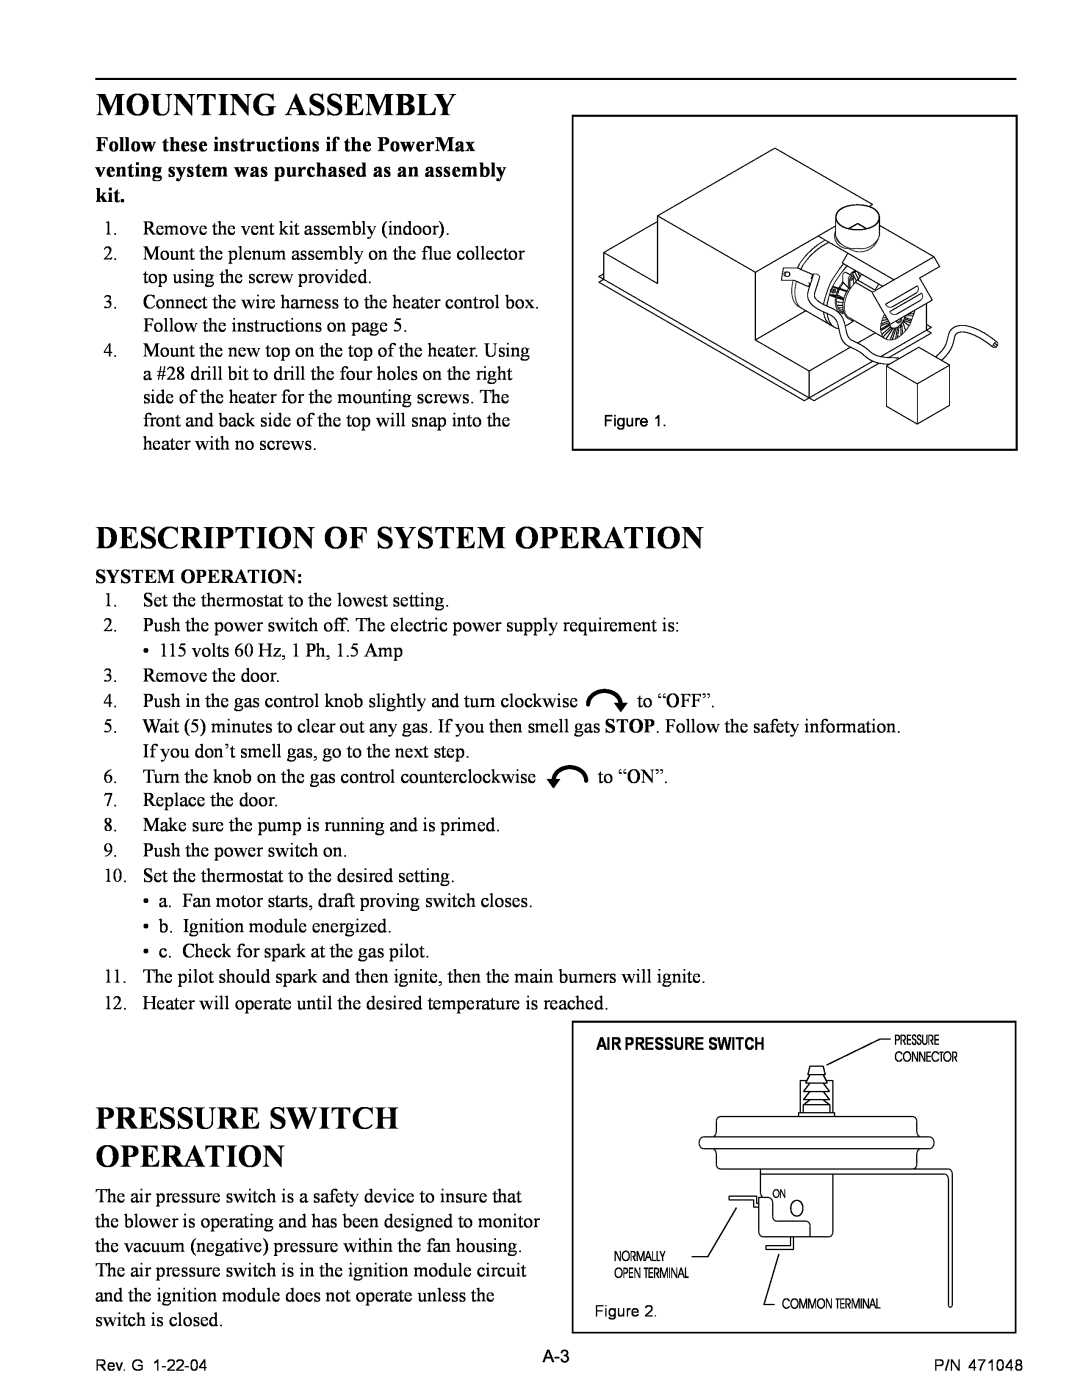 Pentair MiniMax Plus HP Series, PowerMax Mounting Assembly, Description Of System Operation, Pressure Switch Operation 